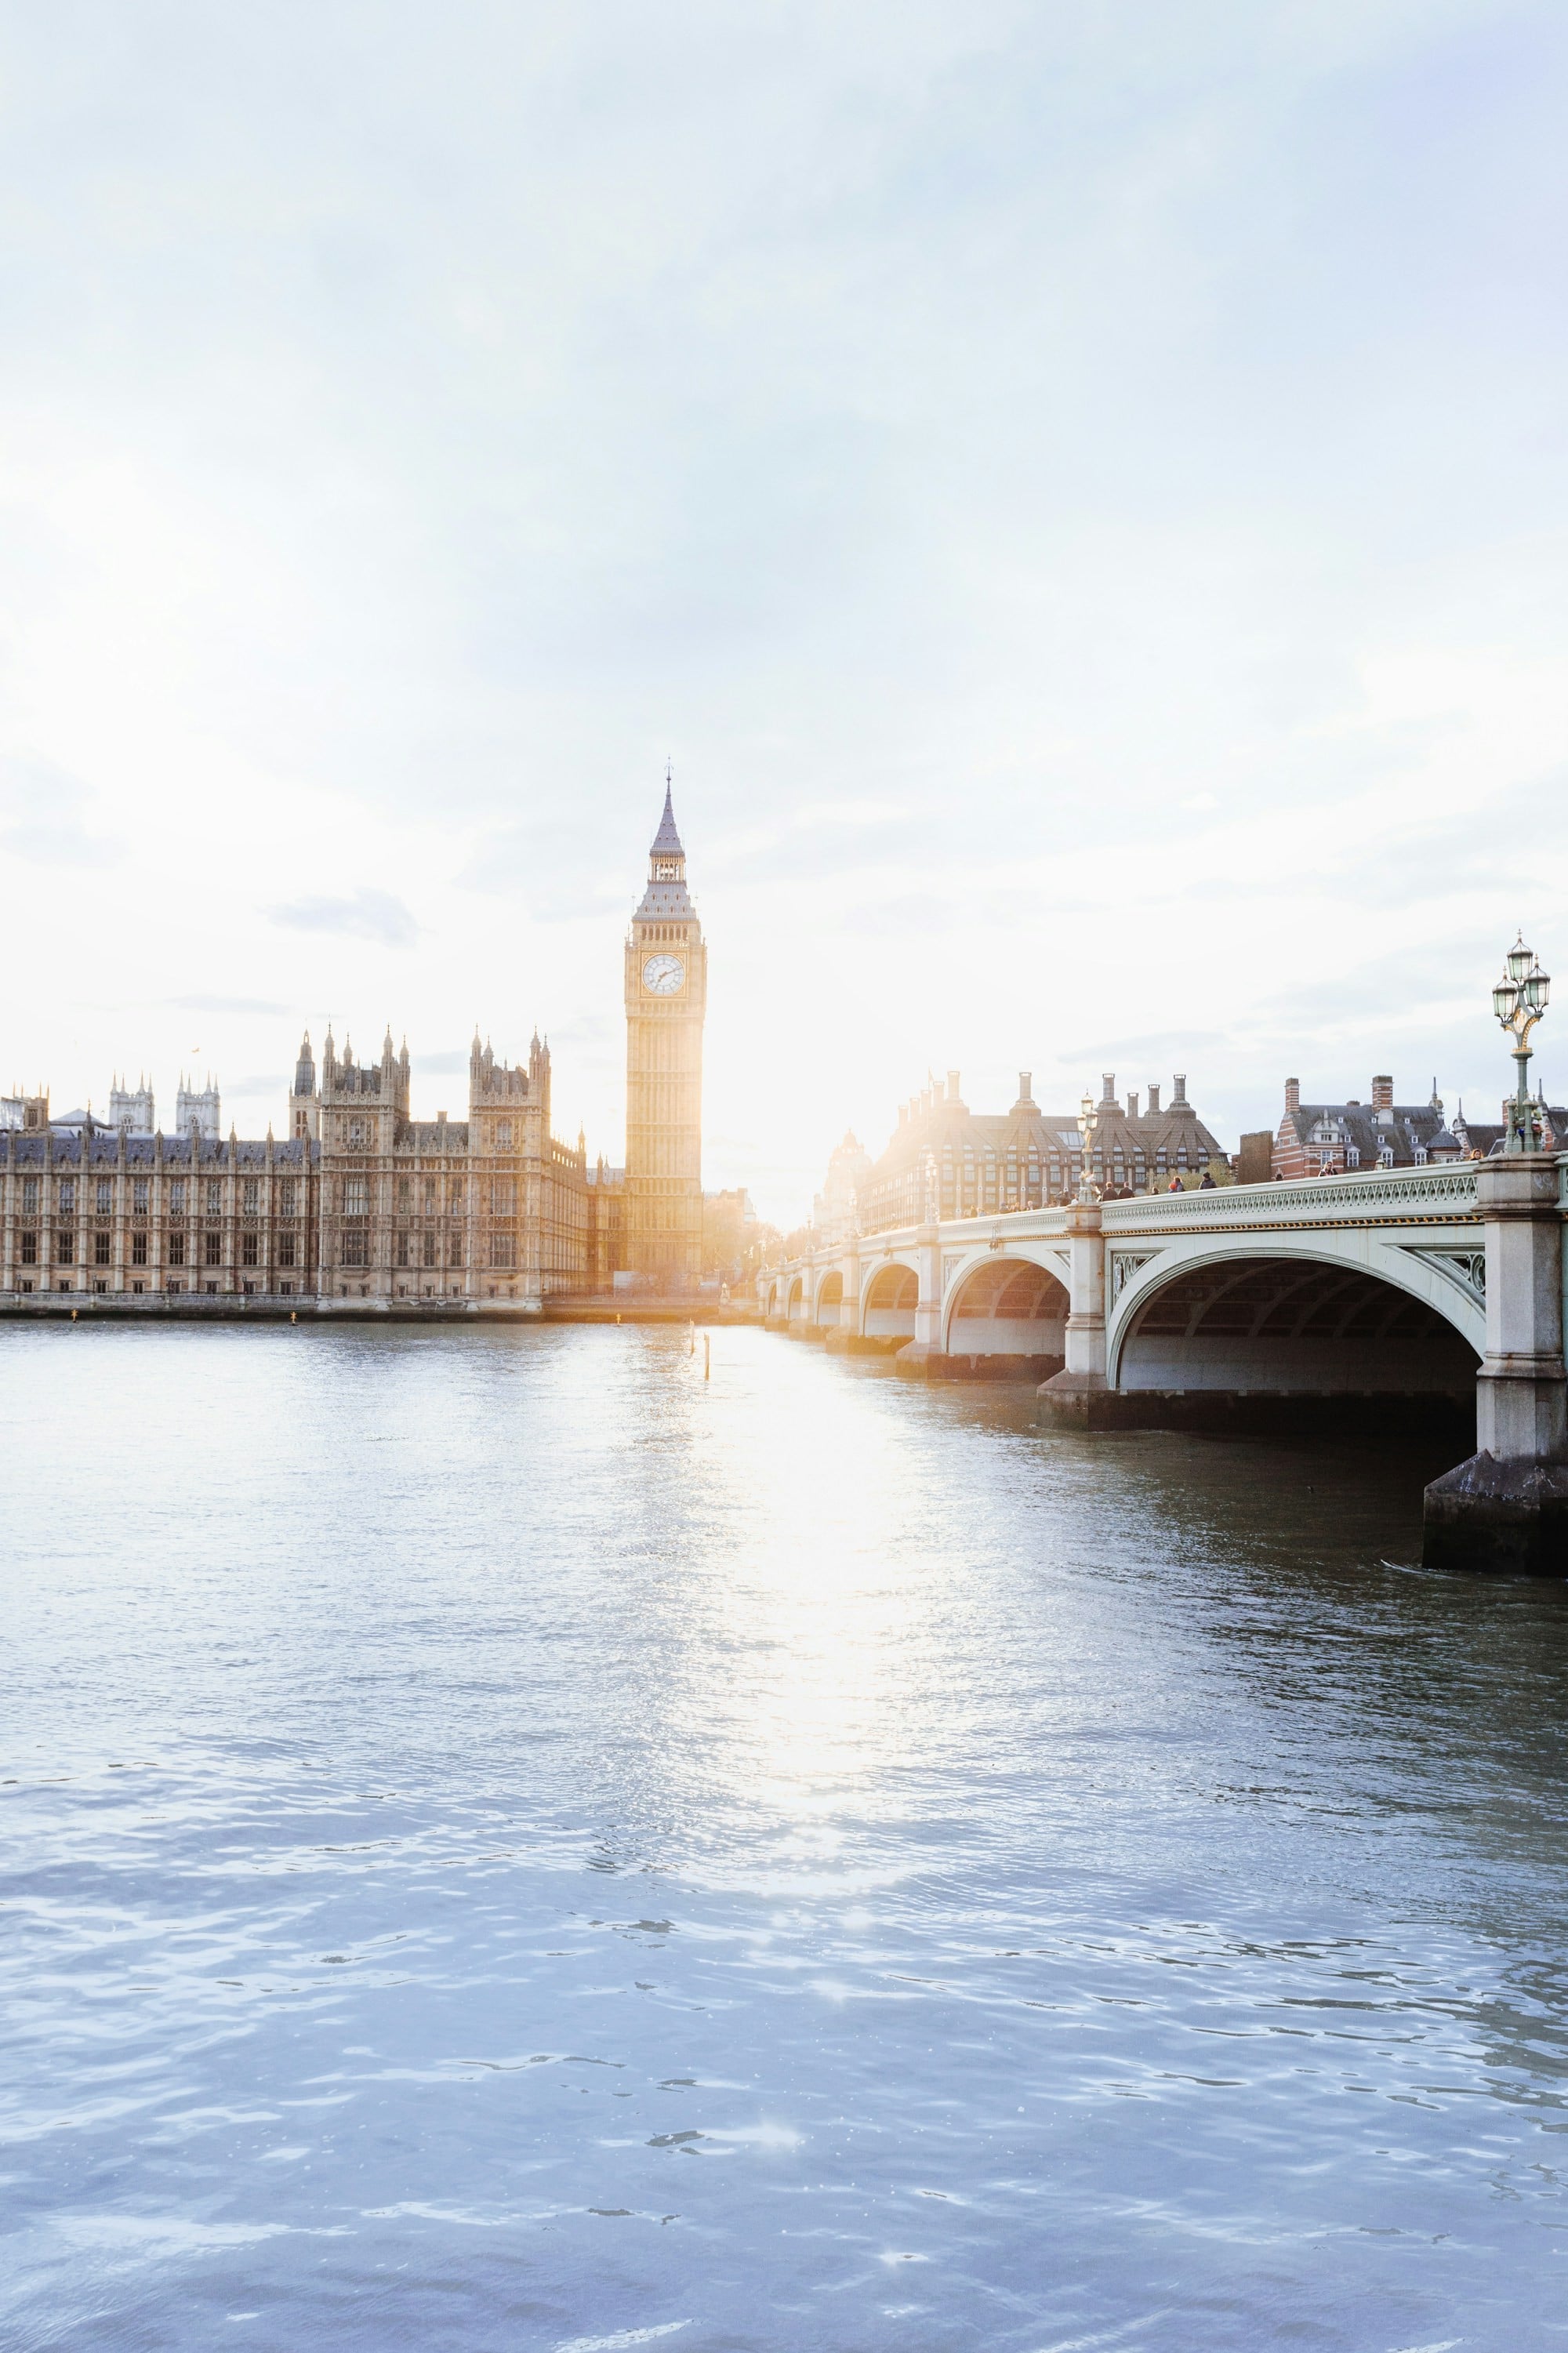 Book your next adventure with DREW Travel. See the sights of Big Ben in London today.